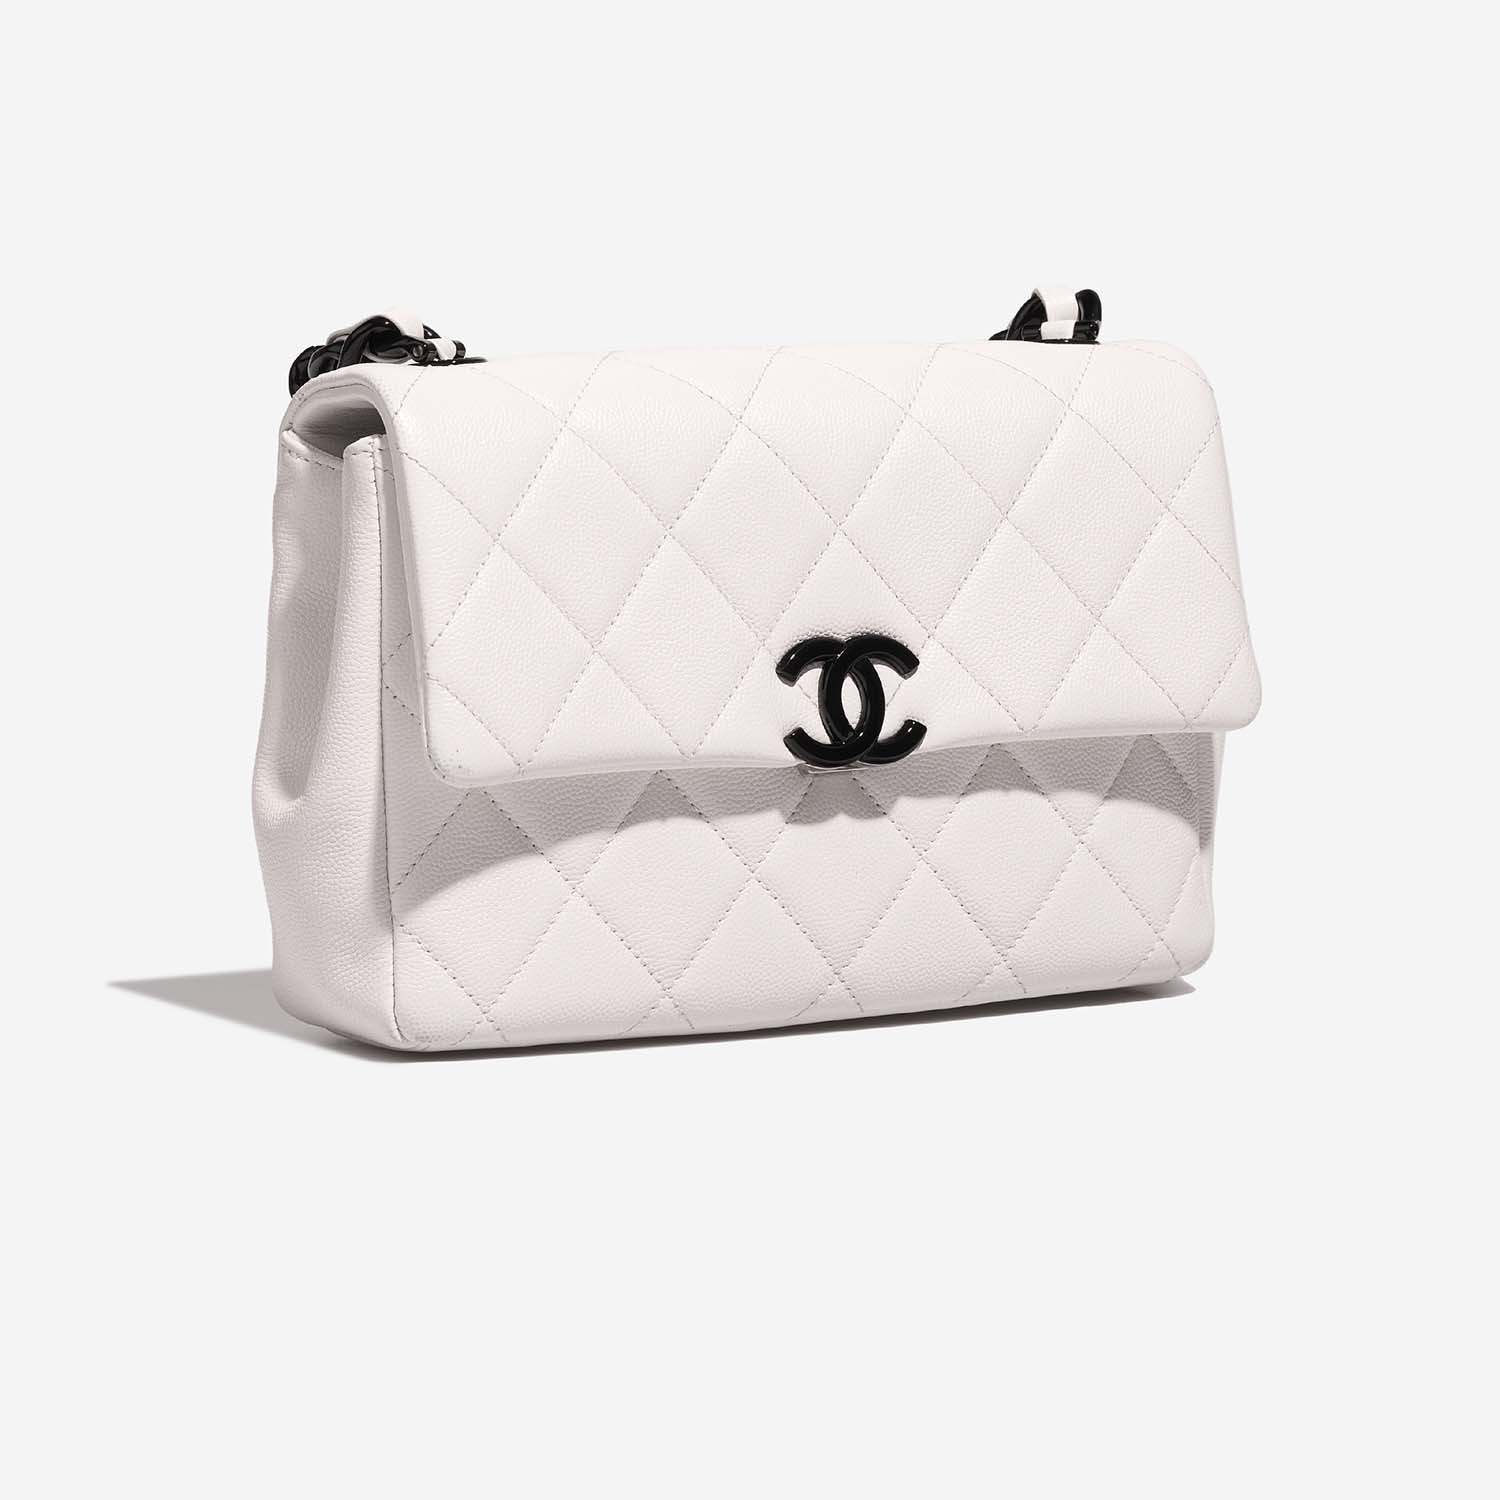 Chanel Timeless Medium White Side Front  | Sell your designer bag on Saclab.com